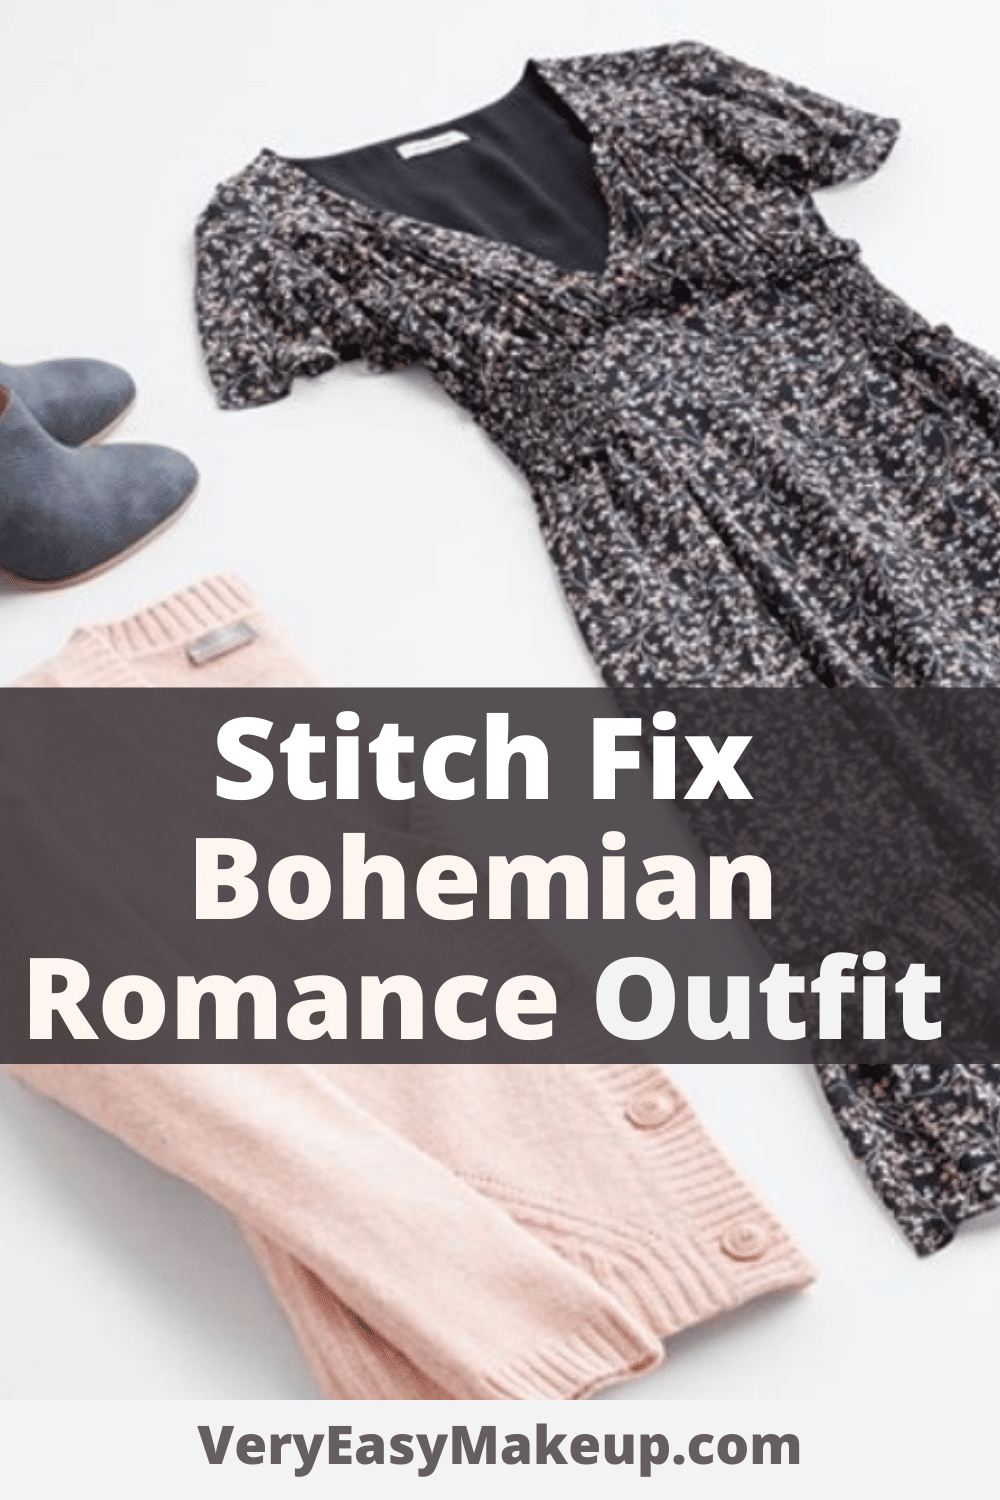 Stitch Fix Bohemian Romance Outfit and Bohemian Romance Dress Online by Very Easy Makeup